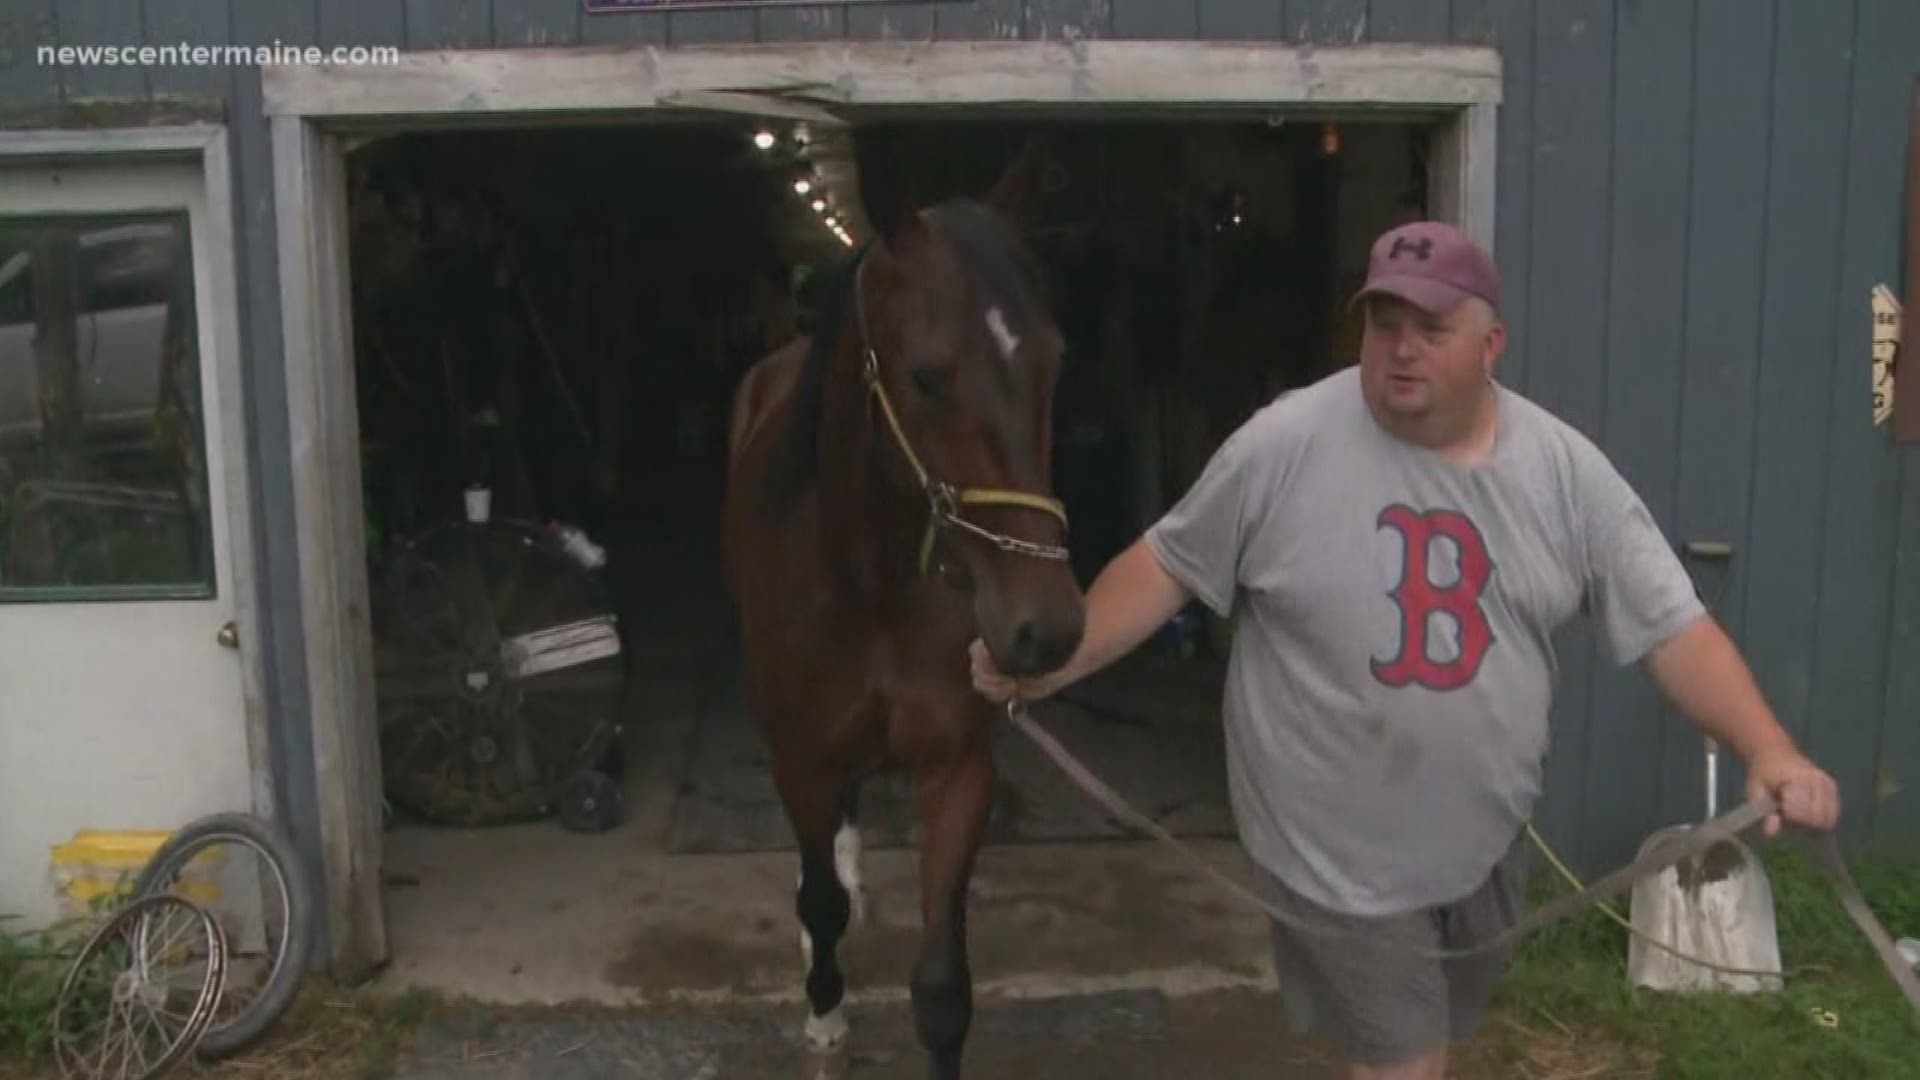 'Cpl. Cole', as the horse is named, will hit the race track for the first time Sunday at the Skowhegan Fair.